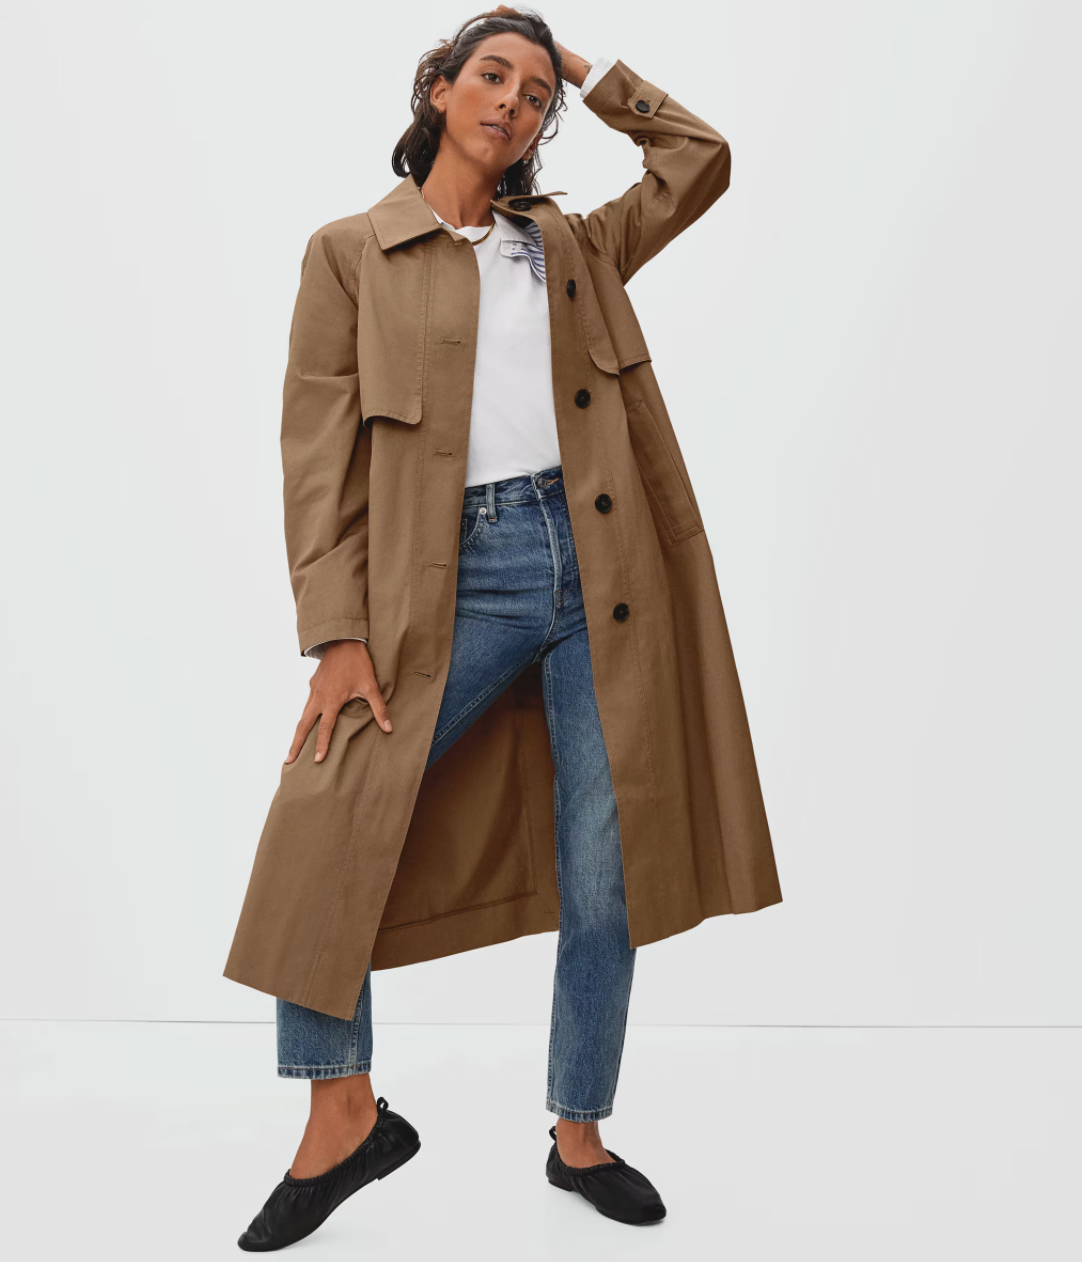 Everlane Trench Coat The Long Mac Coat in Toasted Coconut